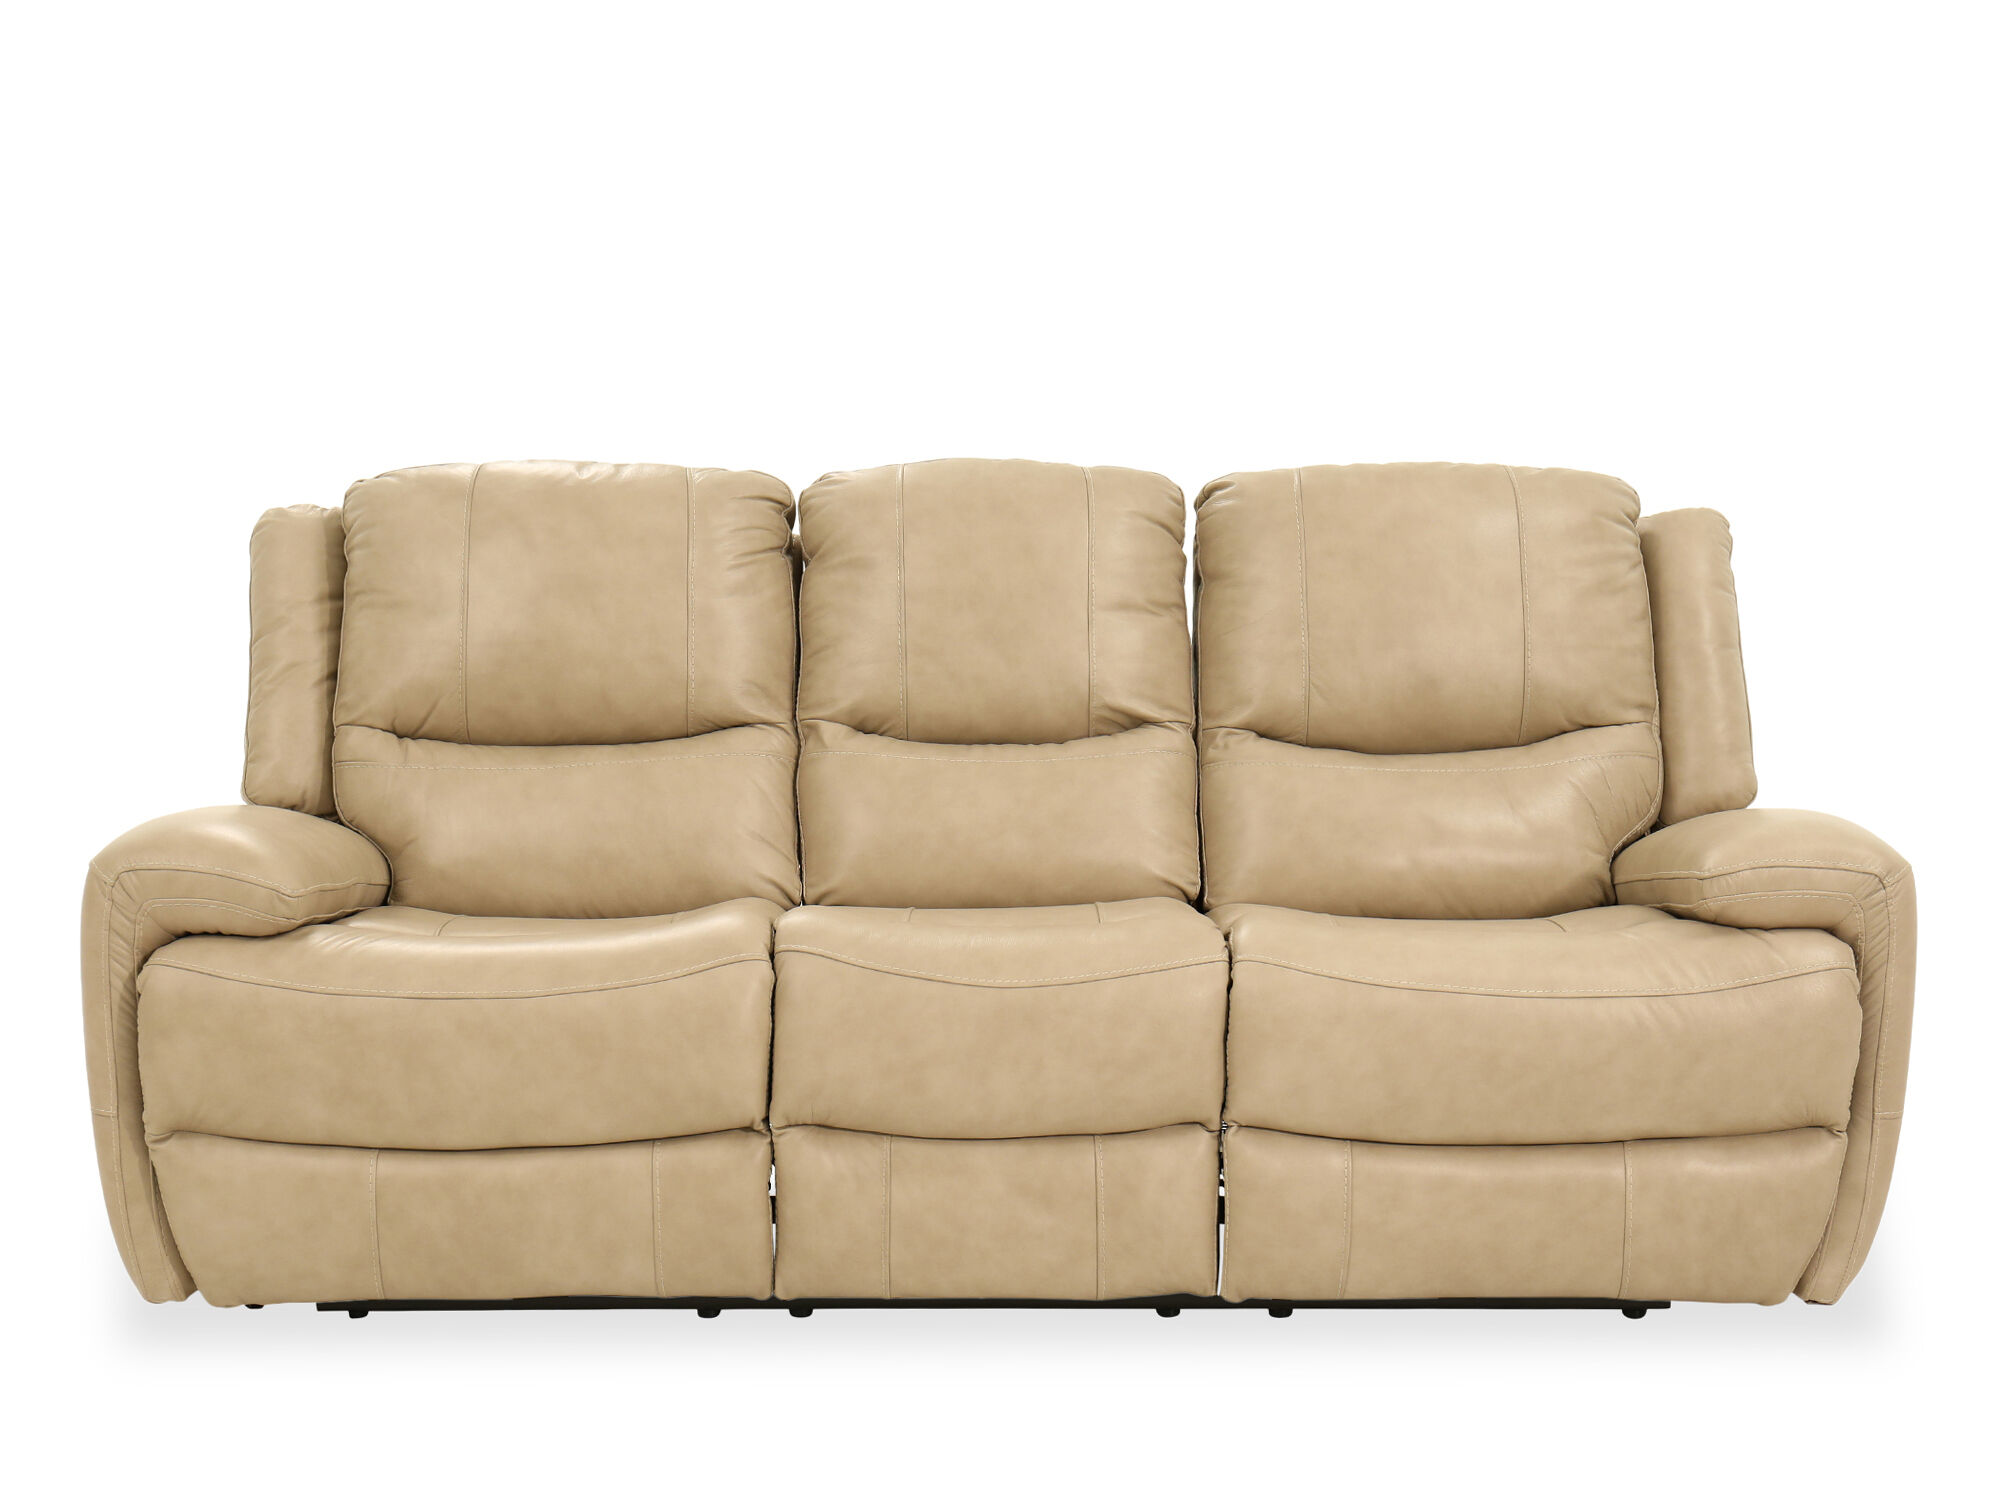 Leather Power Reclining Sofa In Stone, Light Brown Leather Recliner Couch